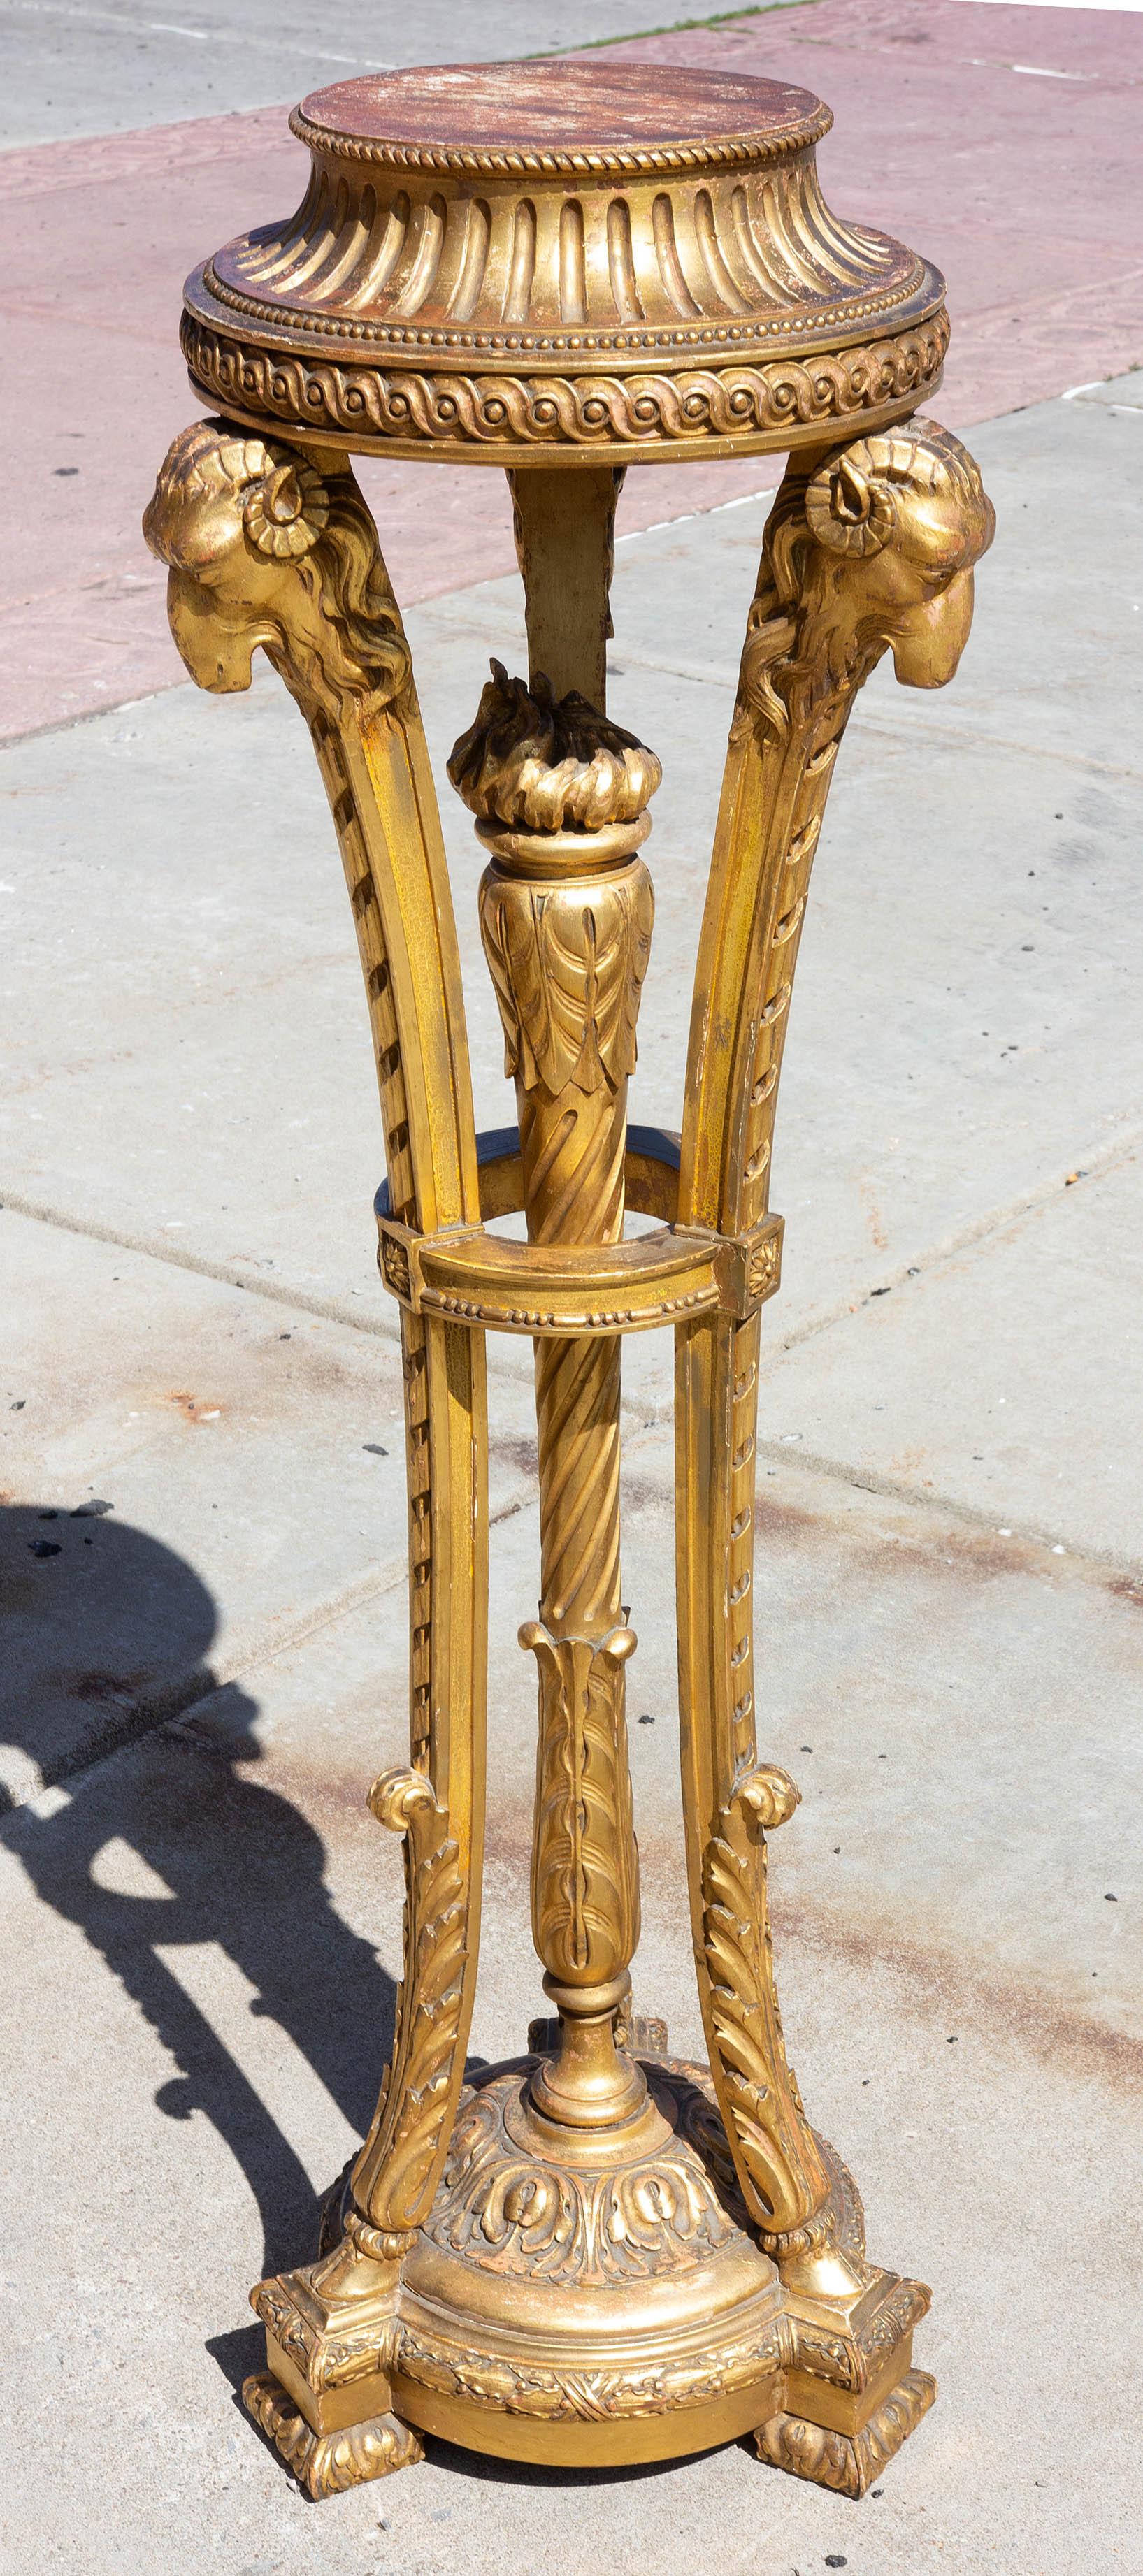 19th century ornate carved and gilded Regency stand. Excellent carving and gilding. Continental. Measure: 43